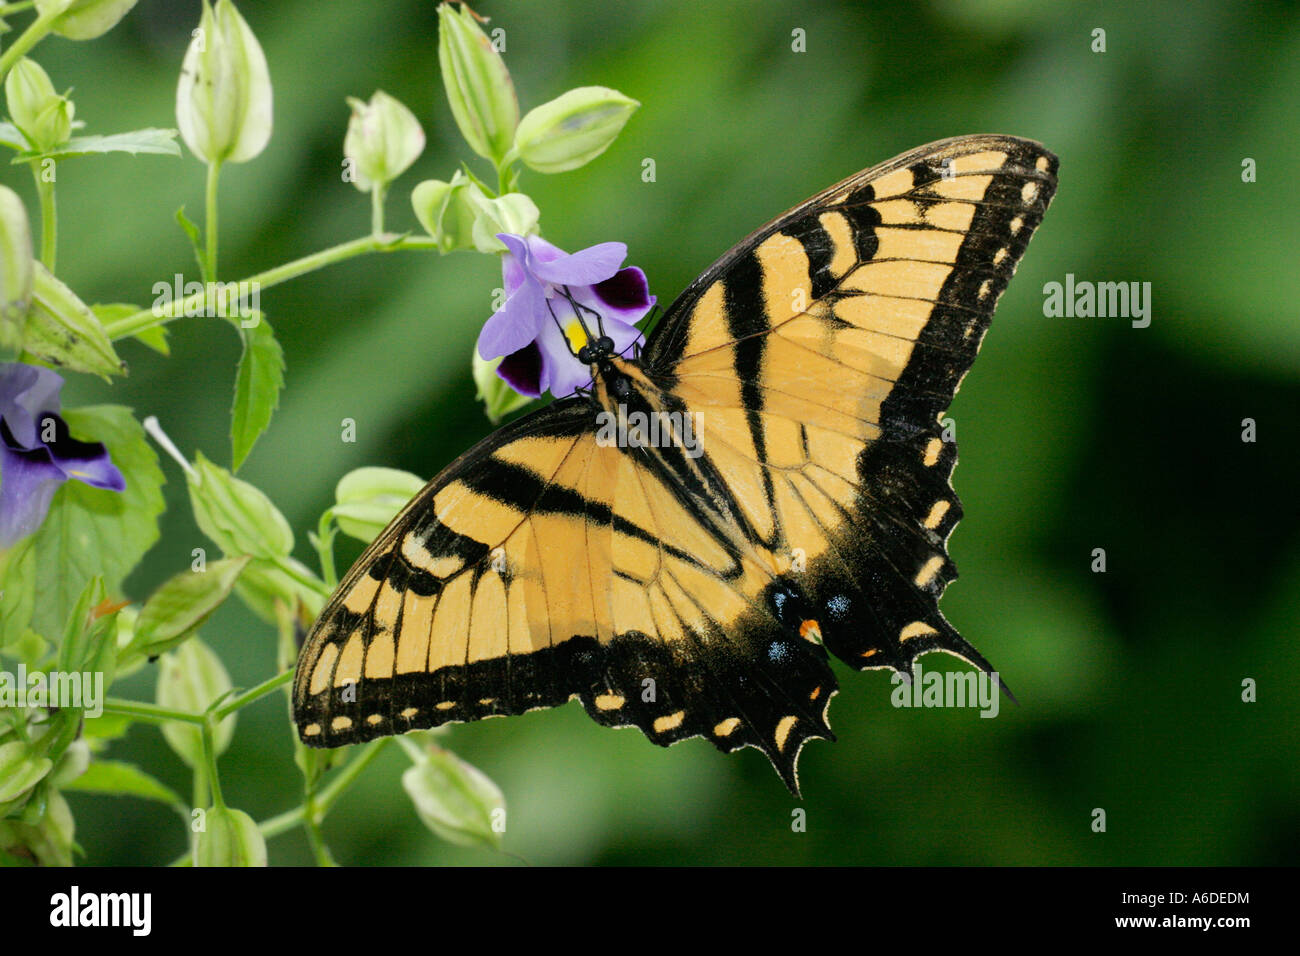 Close-up of a Giant Swallowtail butterfly pollinating a flower (Papilio cresphontes) Stock Photo